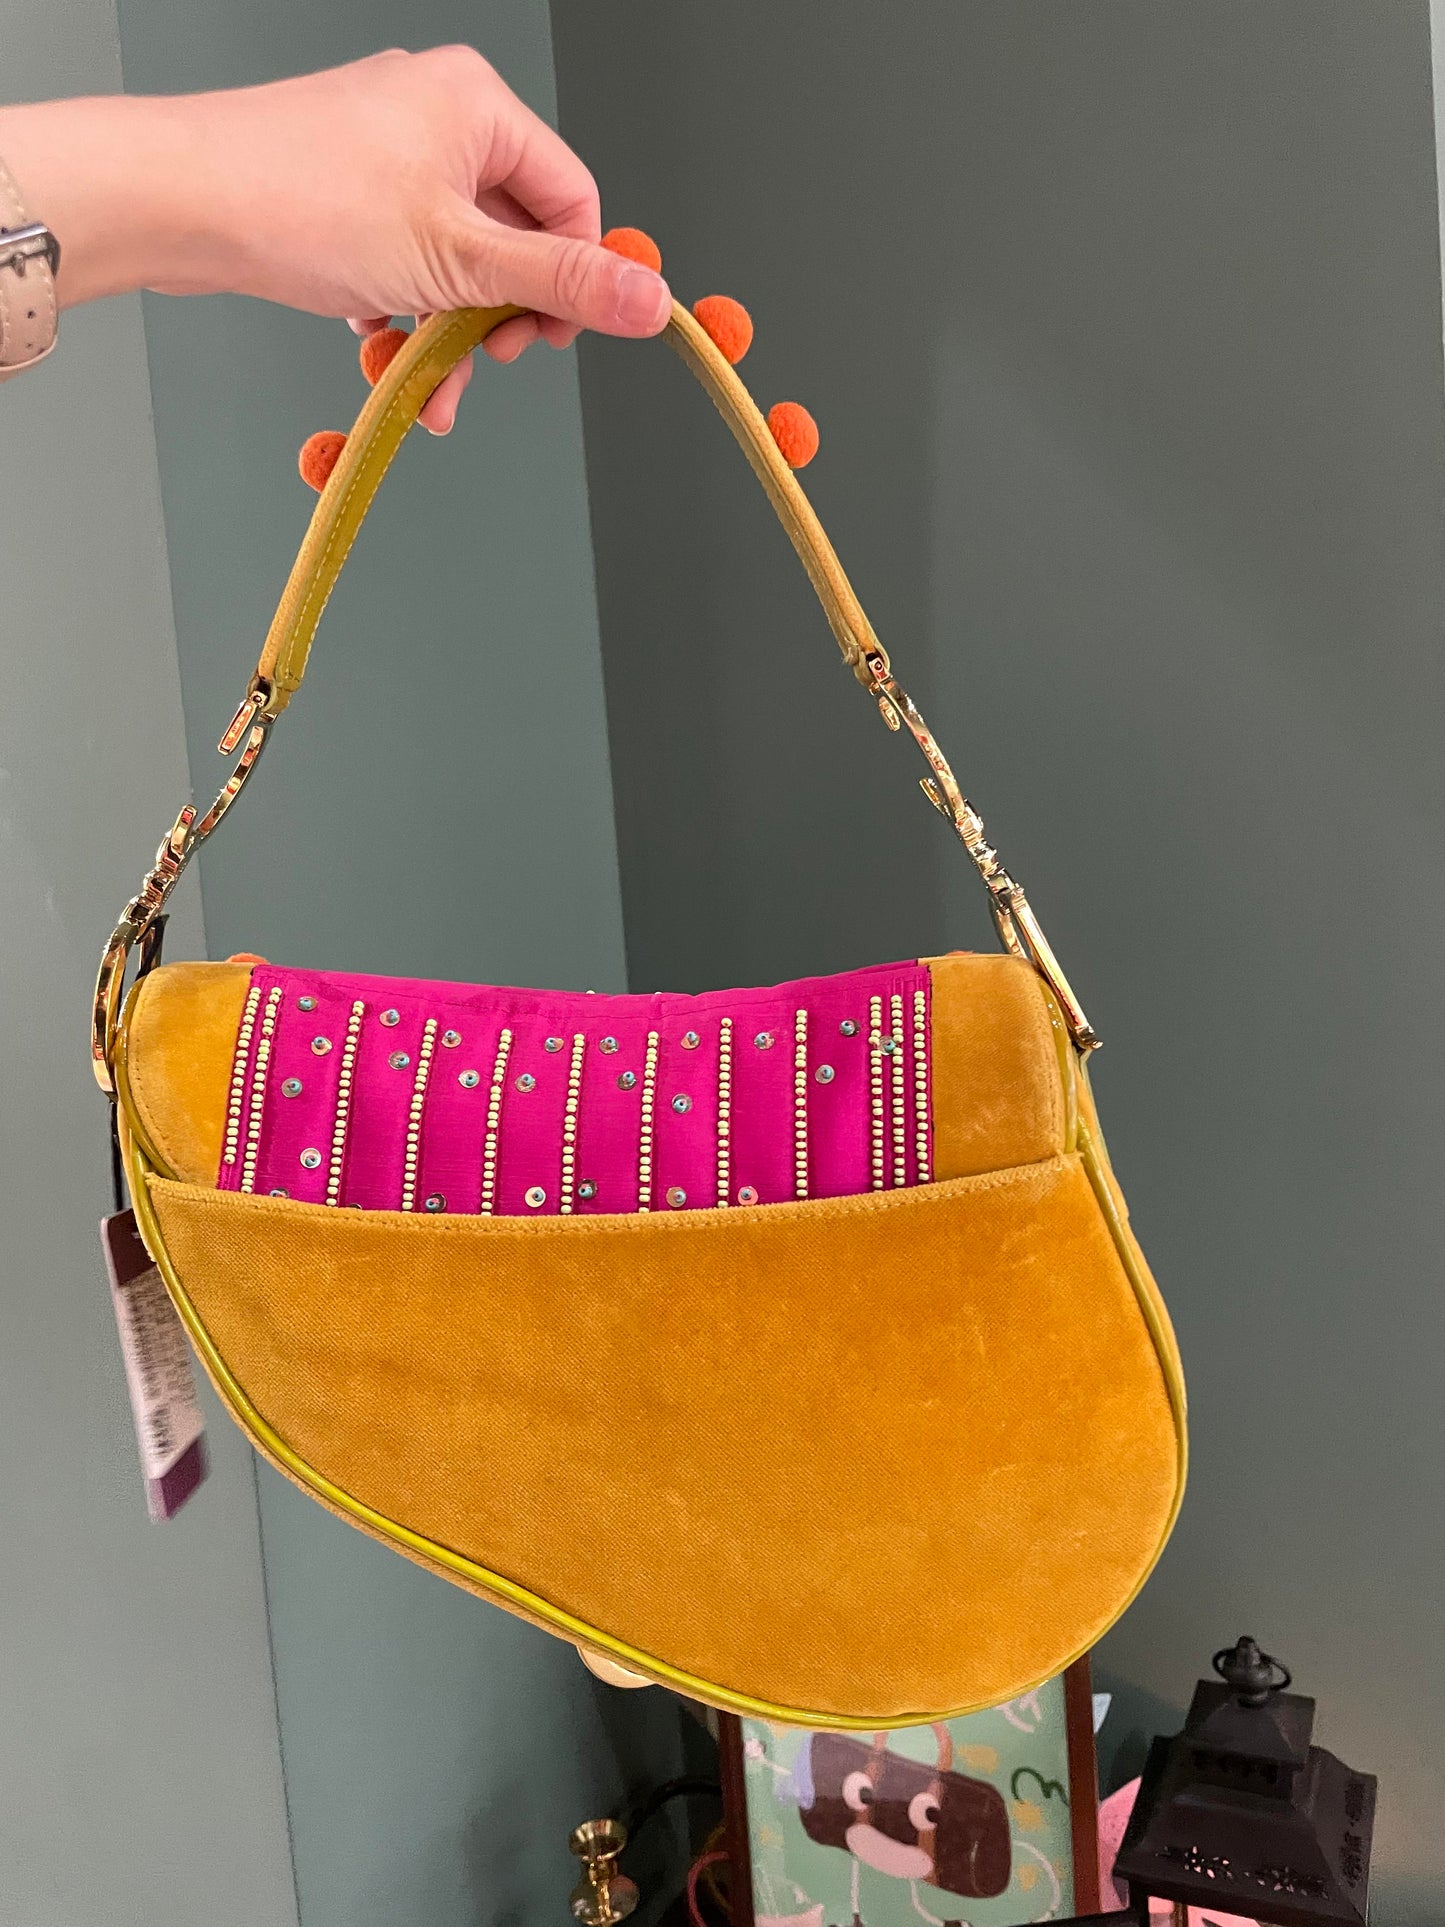 Sold Limited Edition John Galliano era Dior Saddle bag with pompom and bead